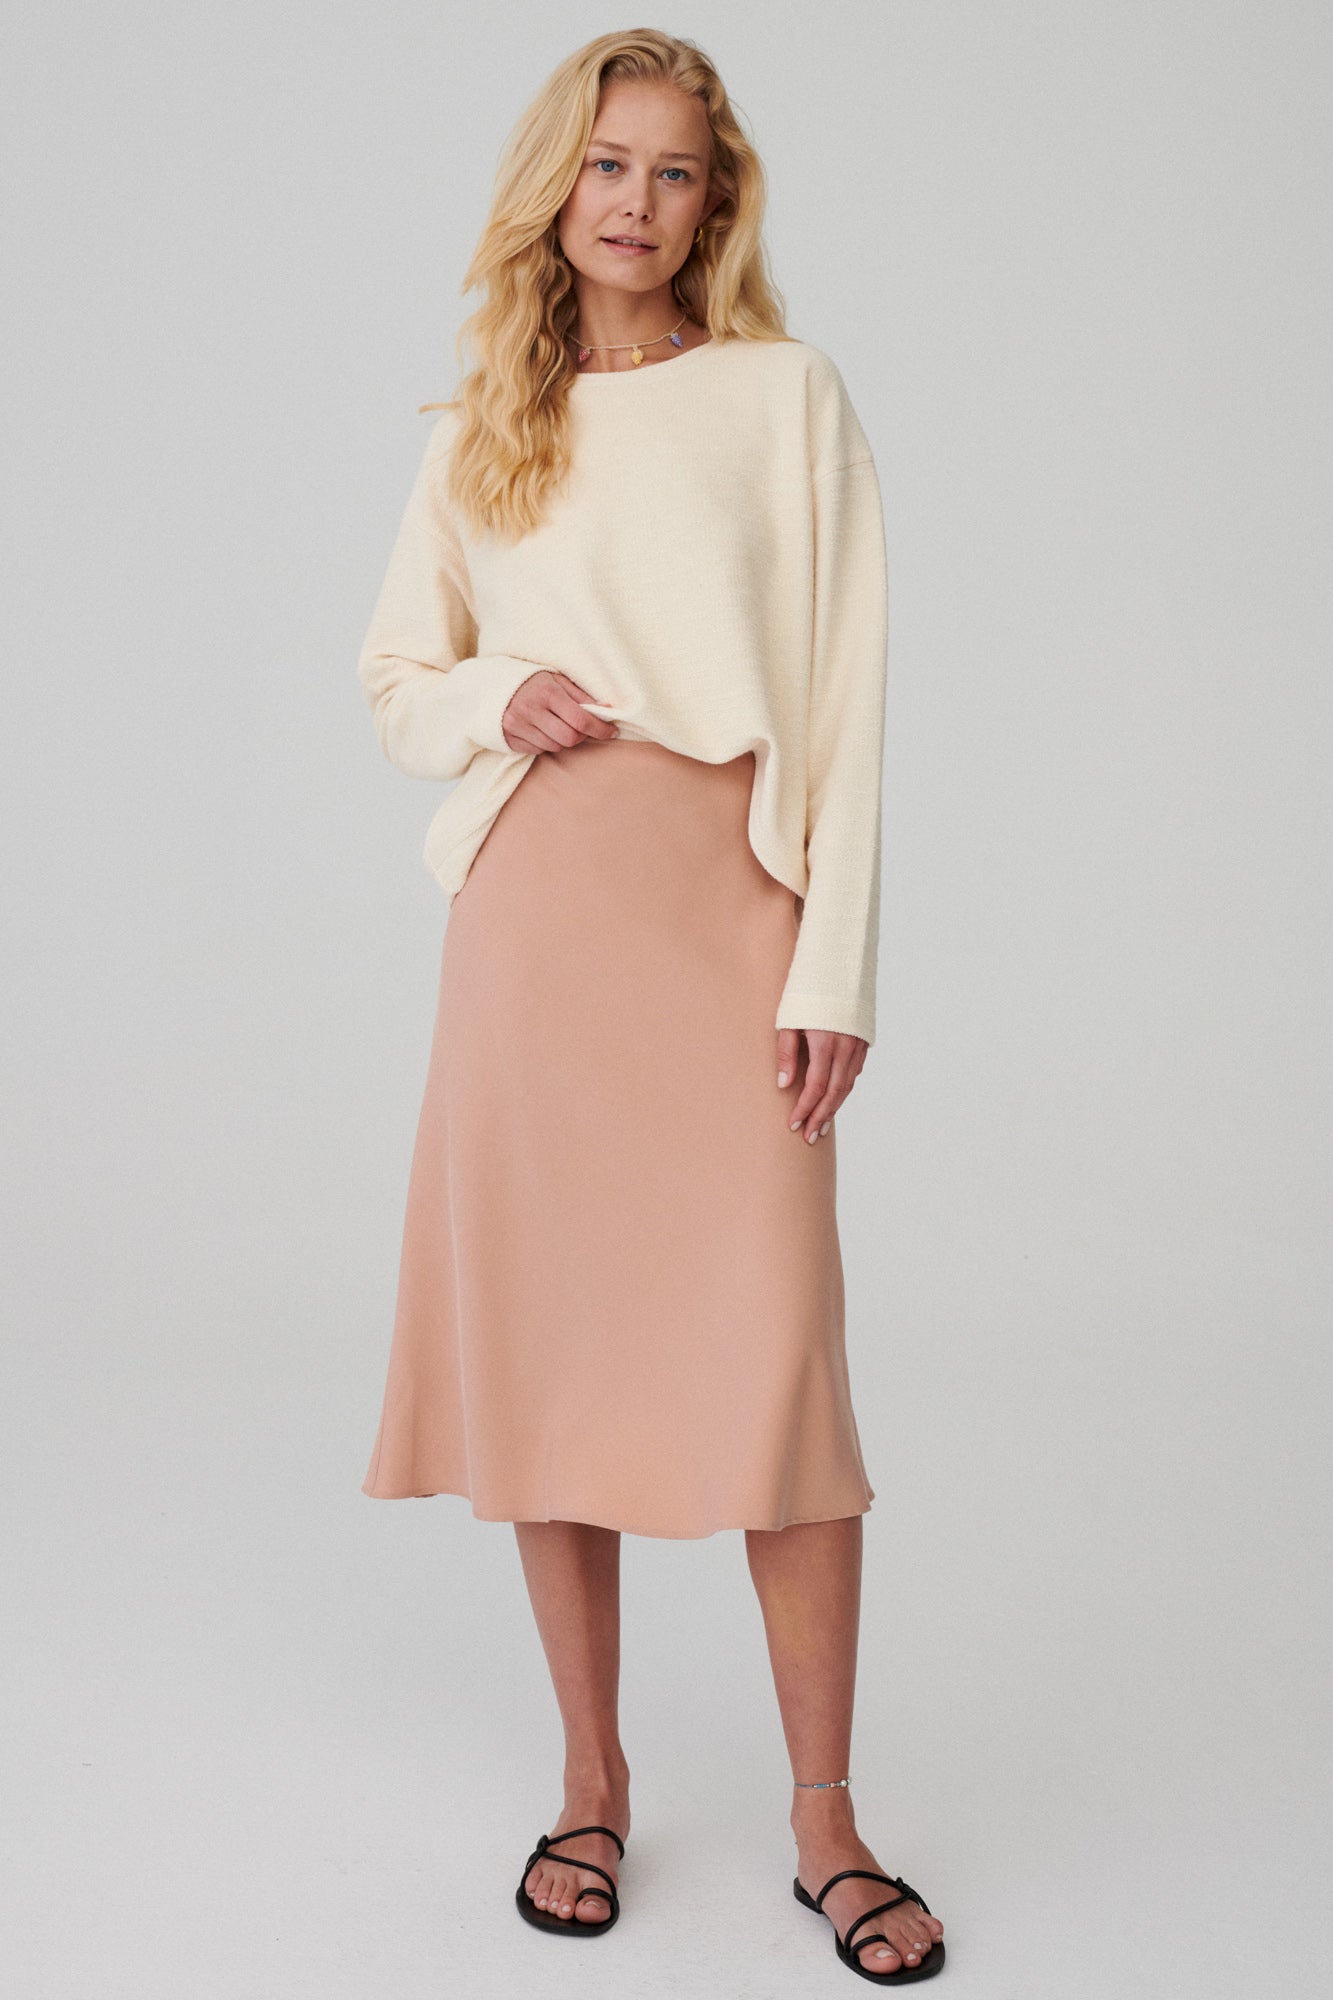 Sweatshirt in cotton / 14 / 04 / unbleached *skirt-in-tencel-07-05-peach-flower* ? The model is 173 cm tall and wears size XS/S?